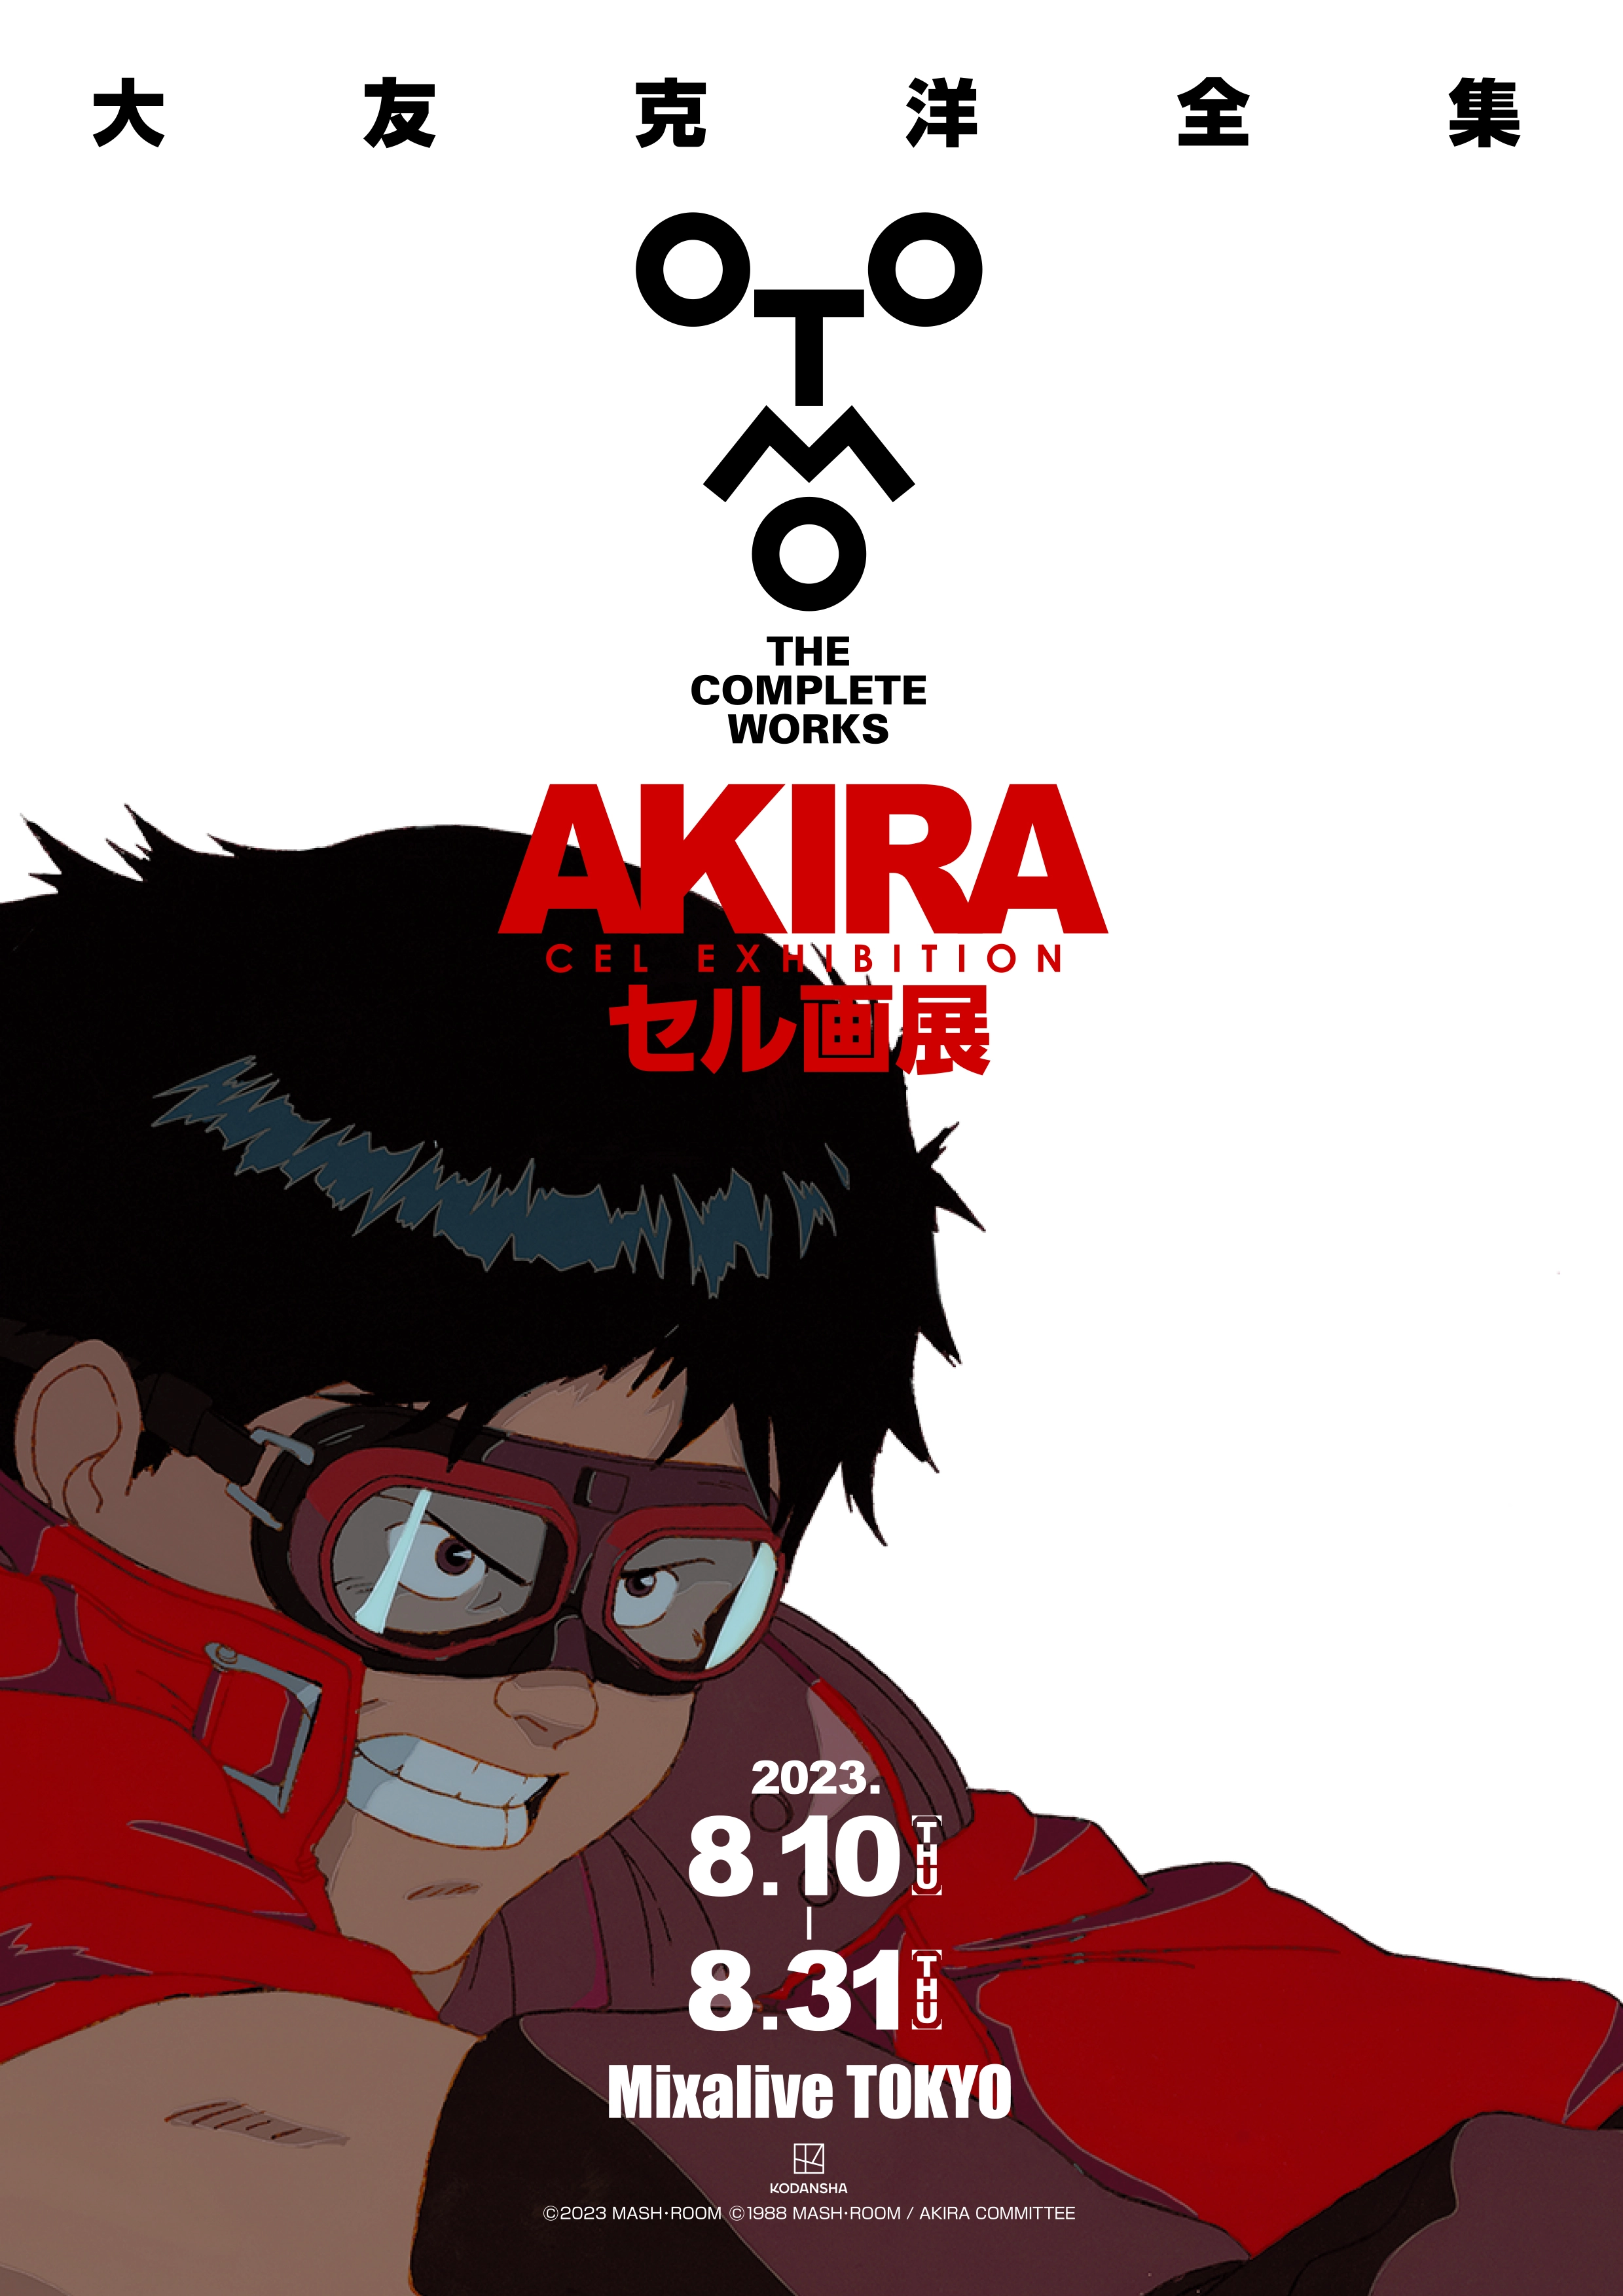 An exhibition of animation cels from “AKIRA,” an anime loved around the  world!